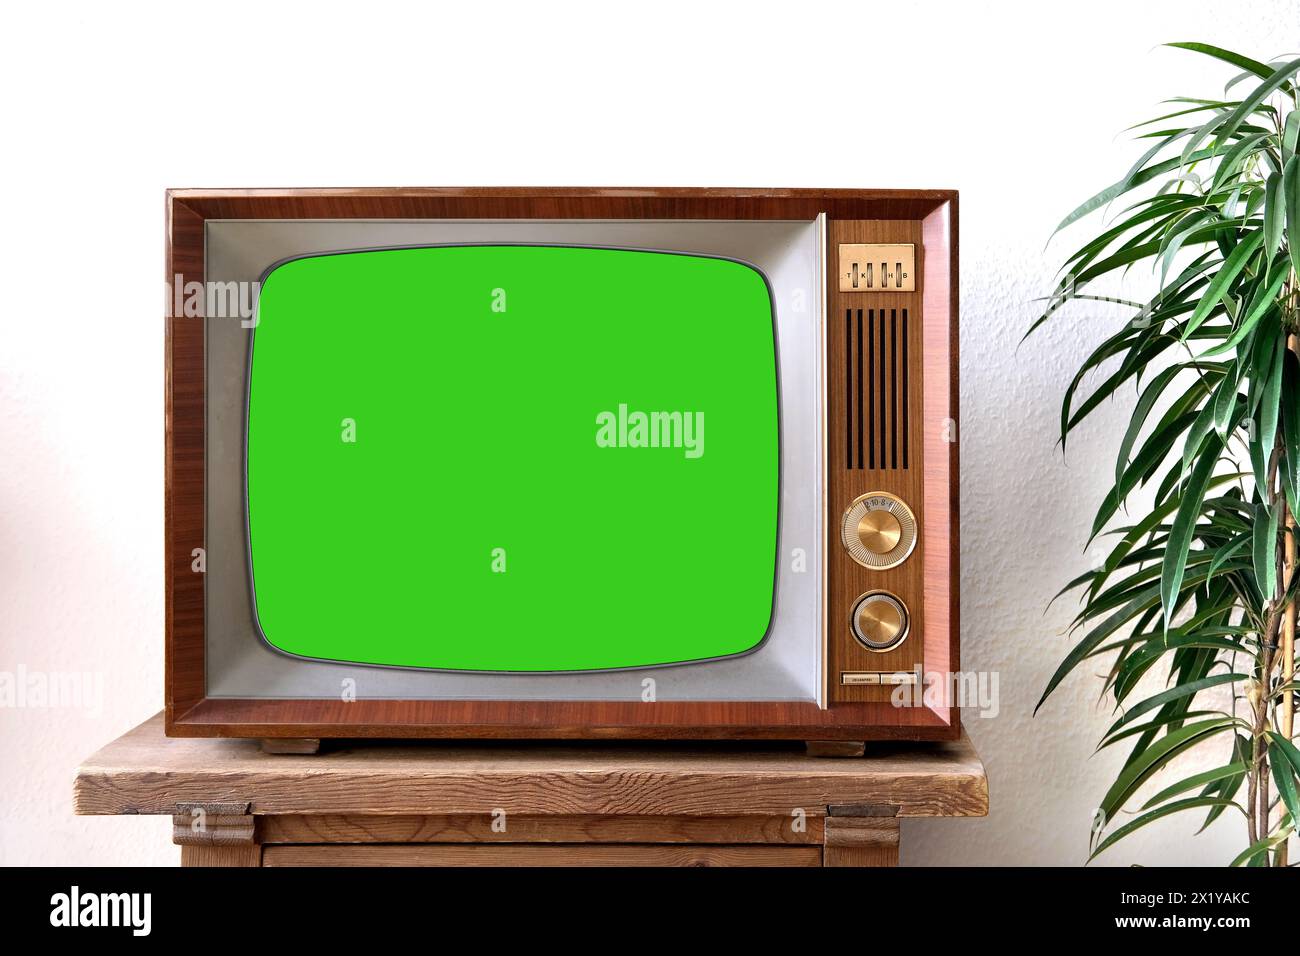 old retro TV with blank green screen for a designer, video film stands in a light room on a wooden table, ficus houseplant nearby, concept of a cozy h Stock Photo